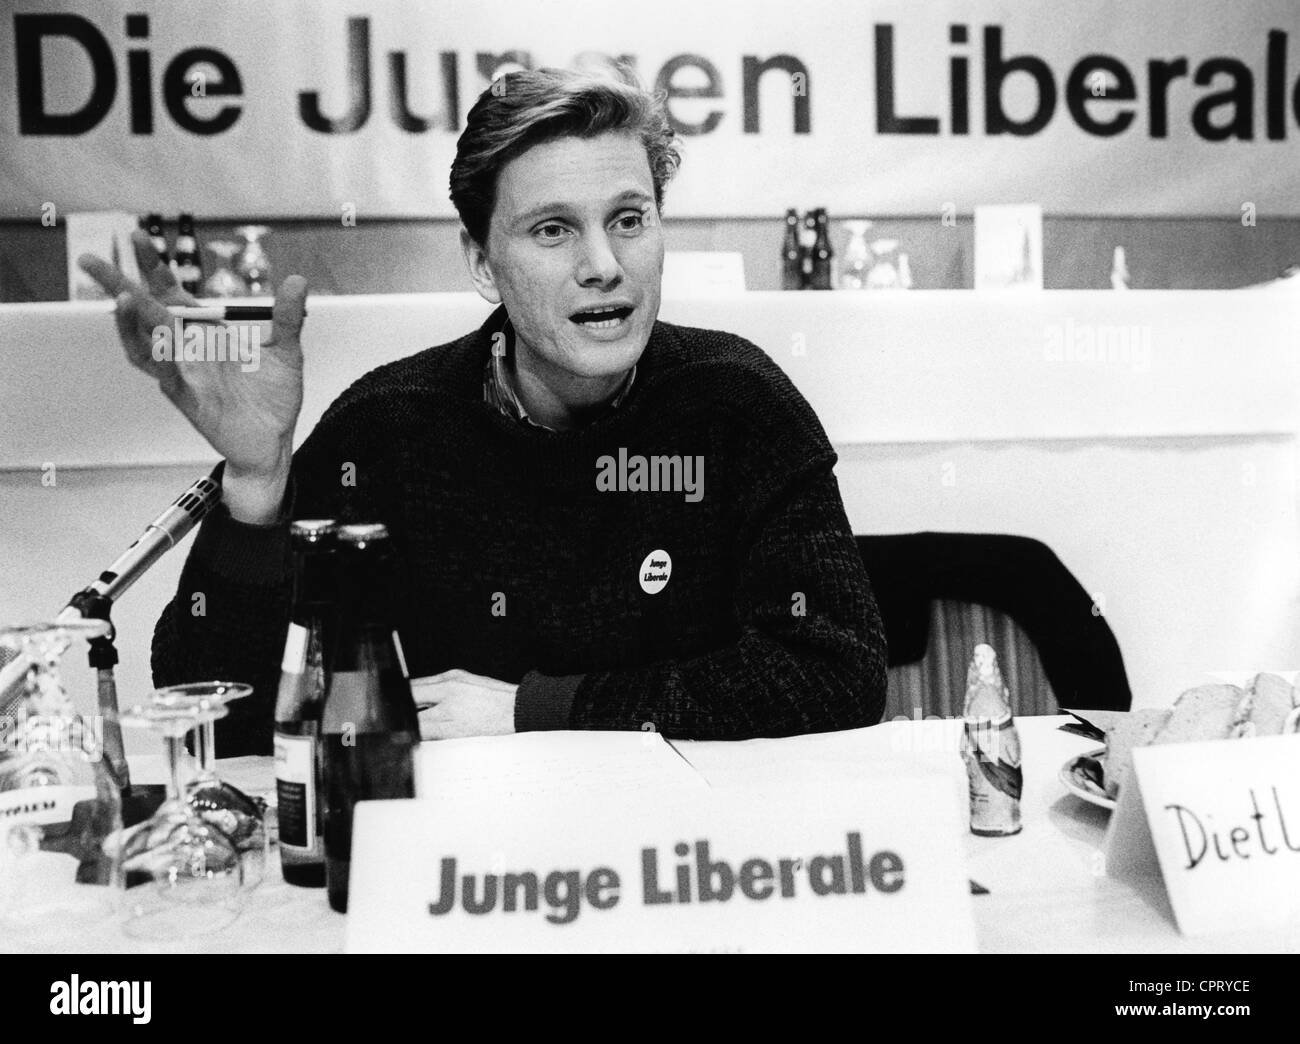 Westerwelle, Guido, 27.12.1961 - 18.3.2016, German politician (Free Democratic Party, FDP), half length, as Chairman of the Young Liberals, at the federal congress of the Young Liberals, Freiburg, Germany, 6.- 8.12.1985, Stock Photo